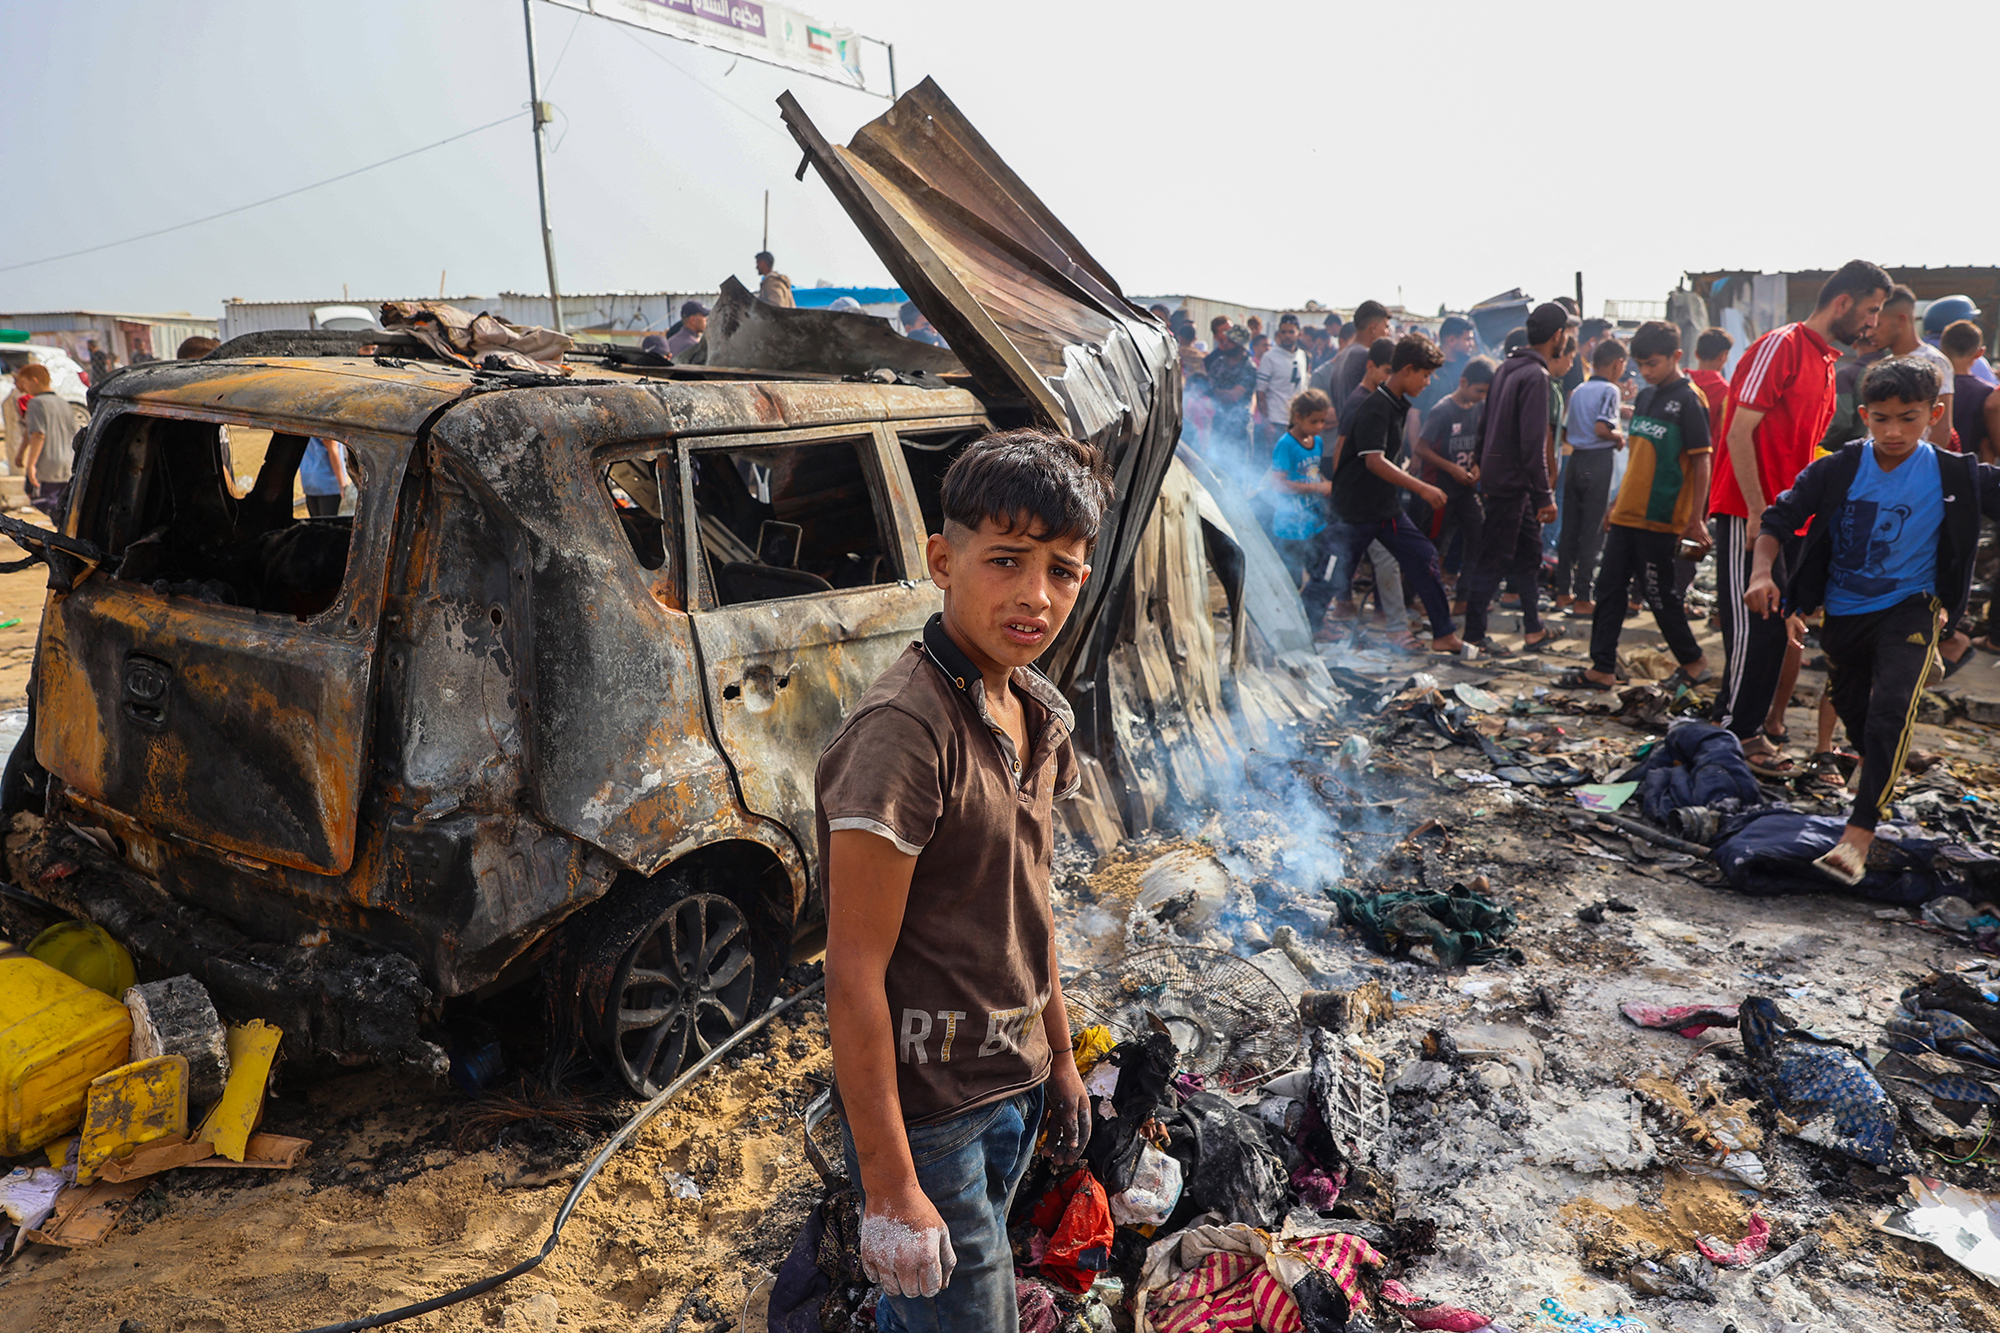 Palestinians gather at the site of an Israeli strike on a camp area housing internally displaced people in Rafah, Gaza, on May 27.